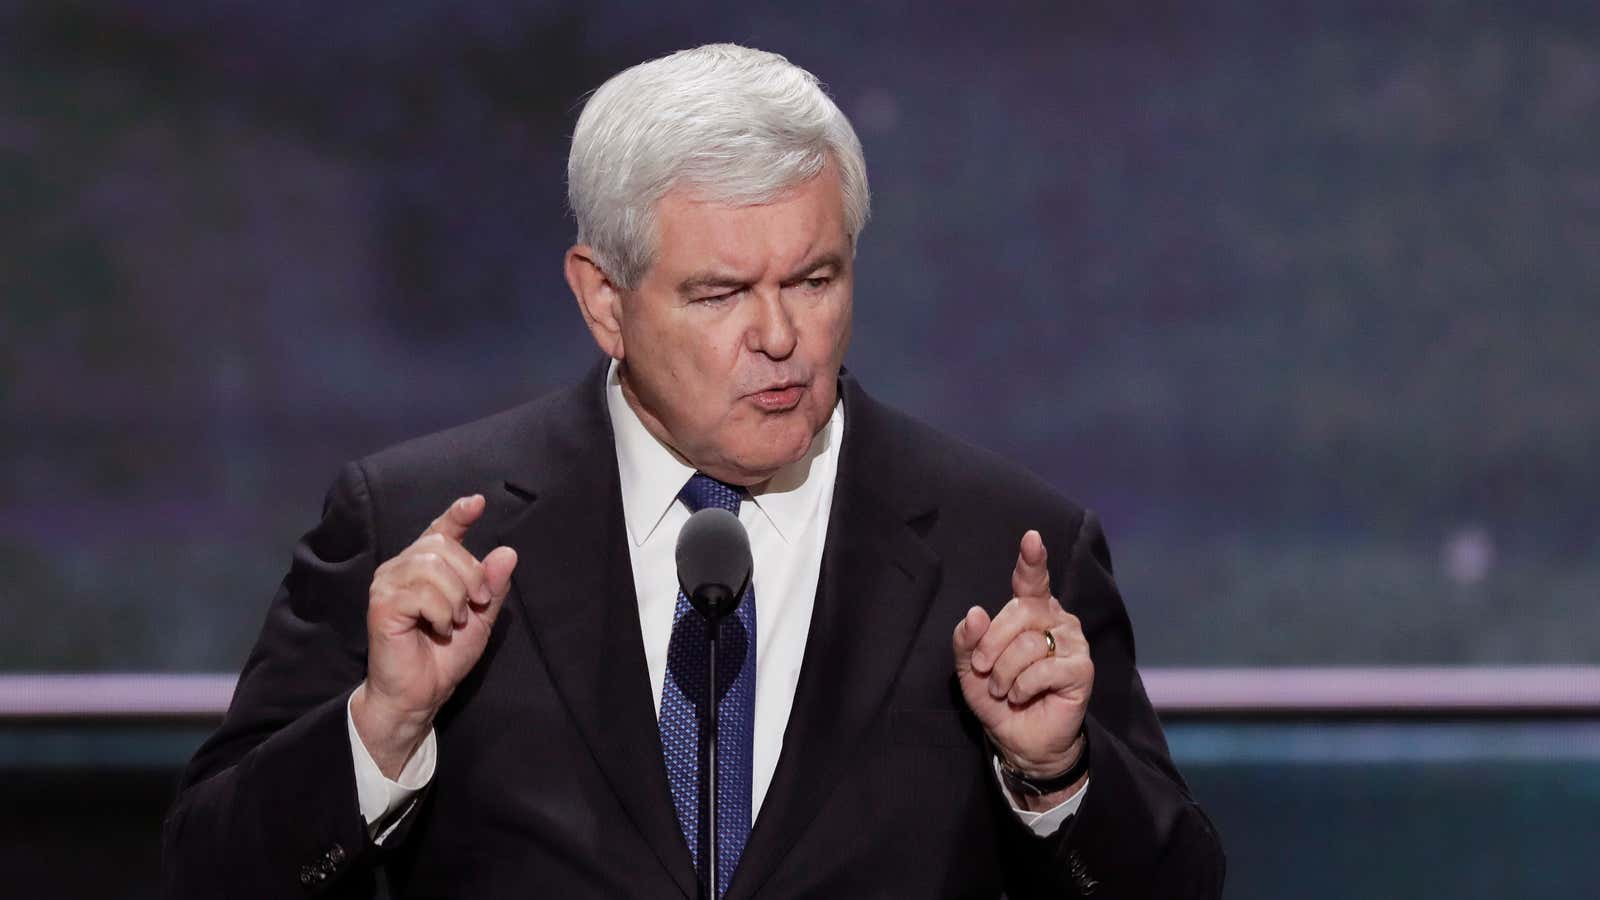 Newt Gingrich addresses the RNC in Cleveland.